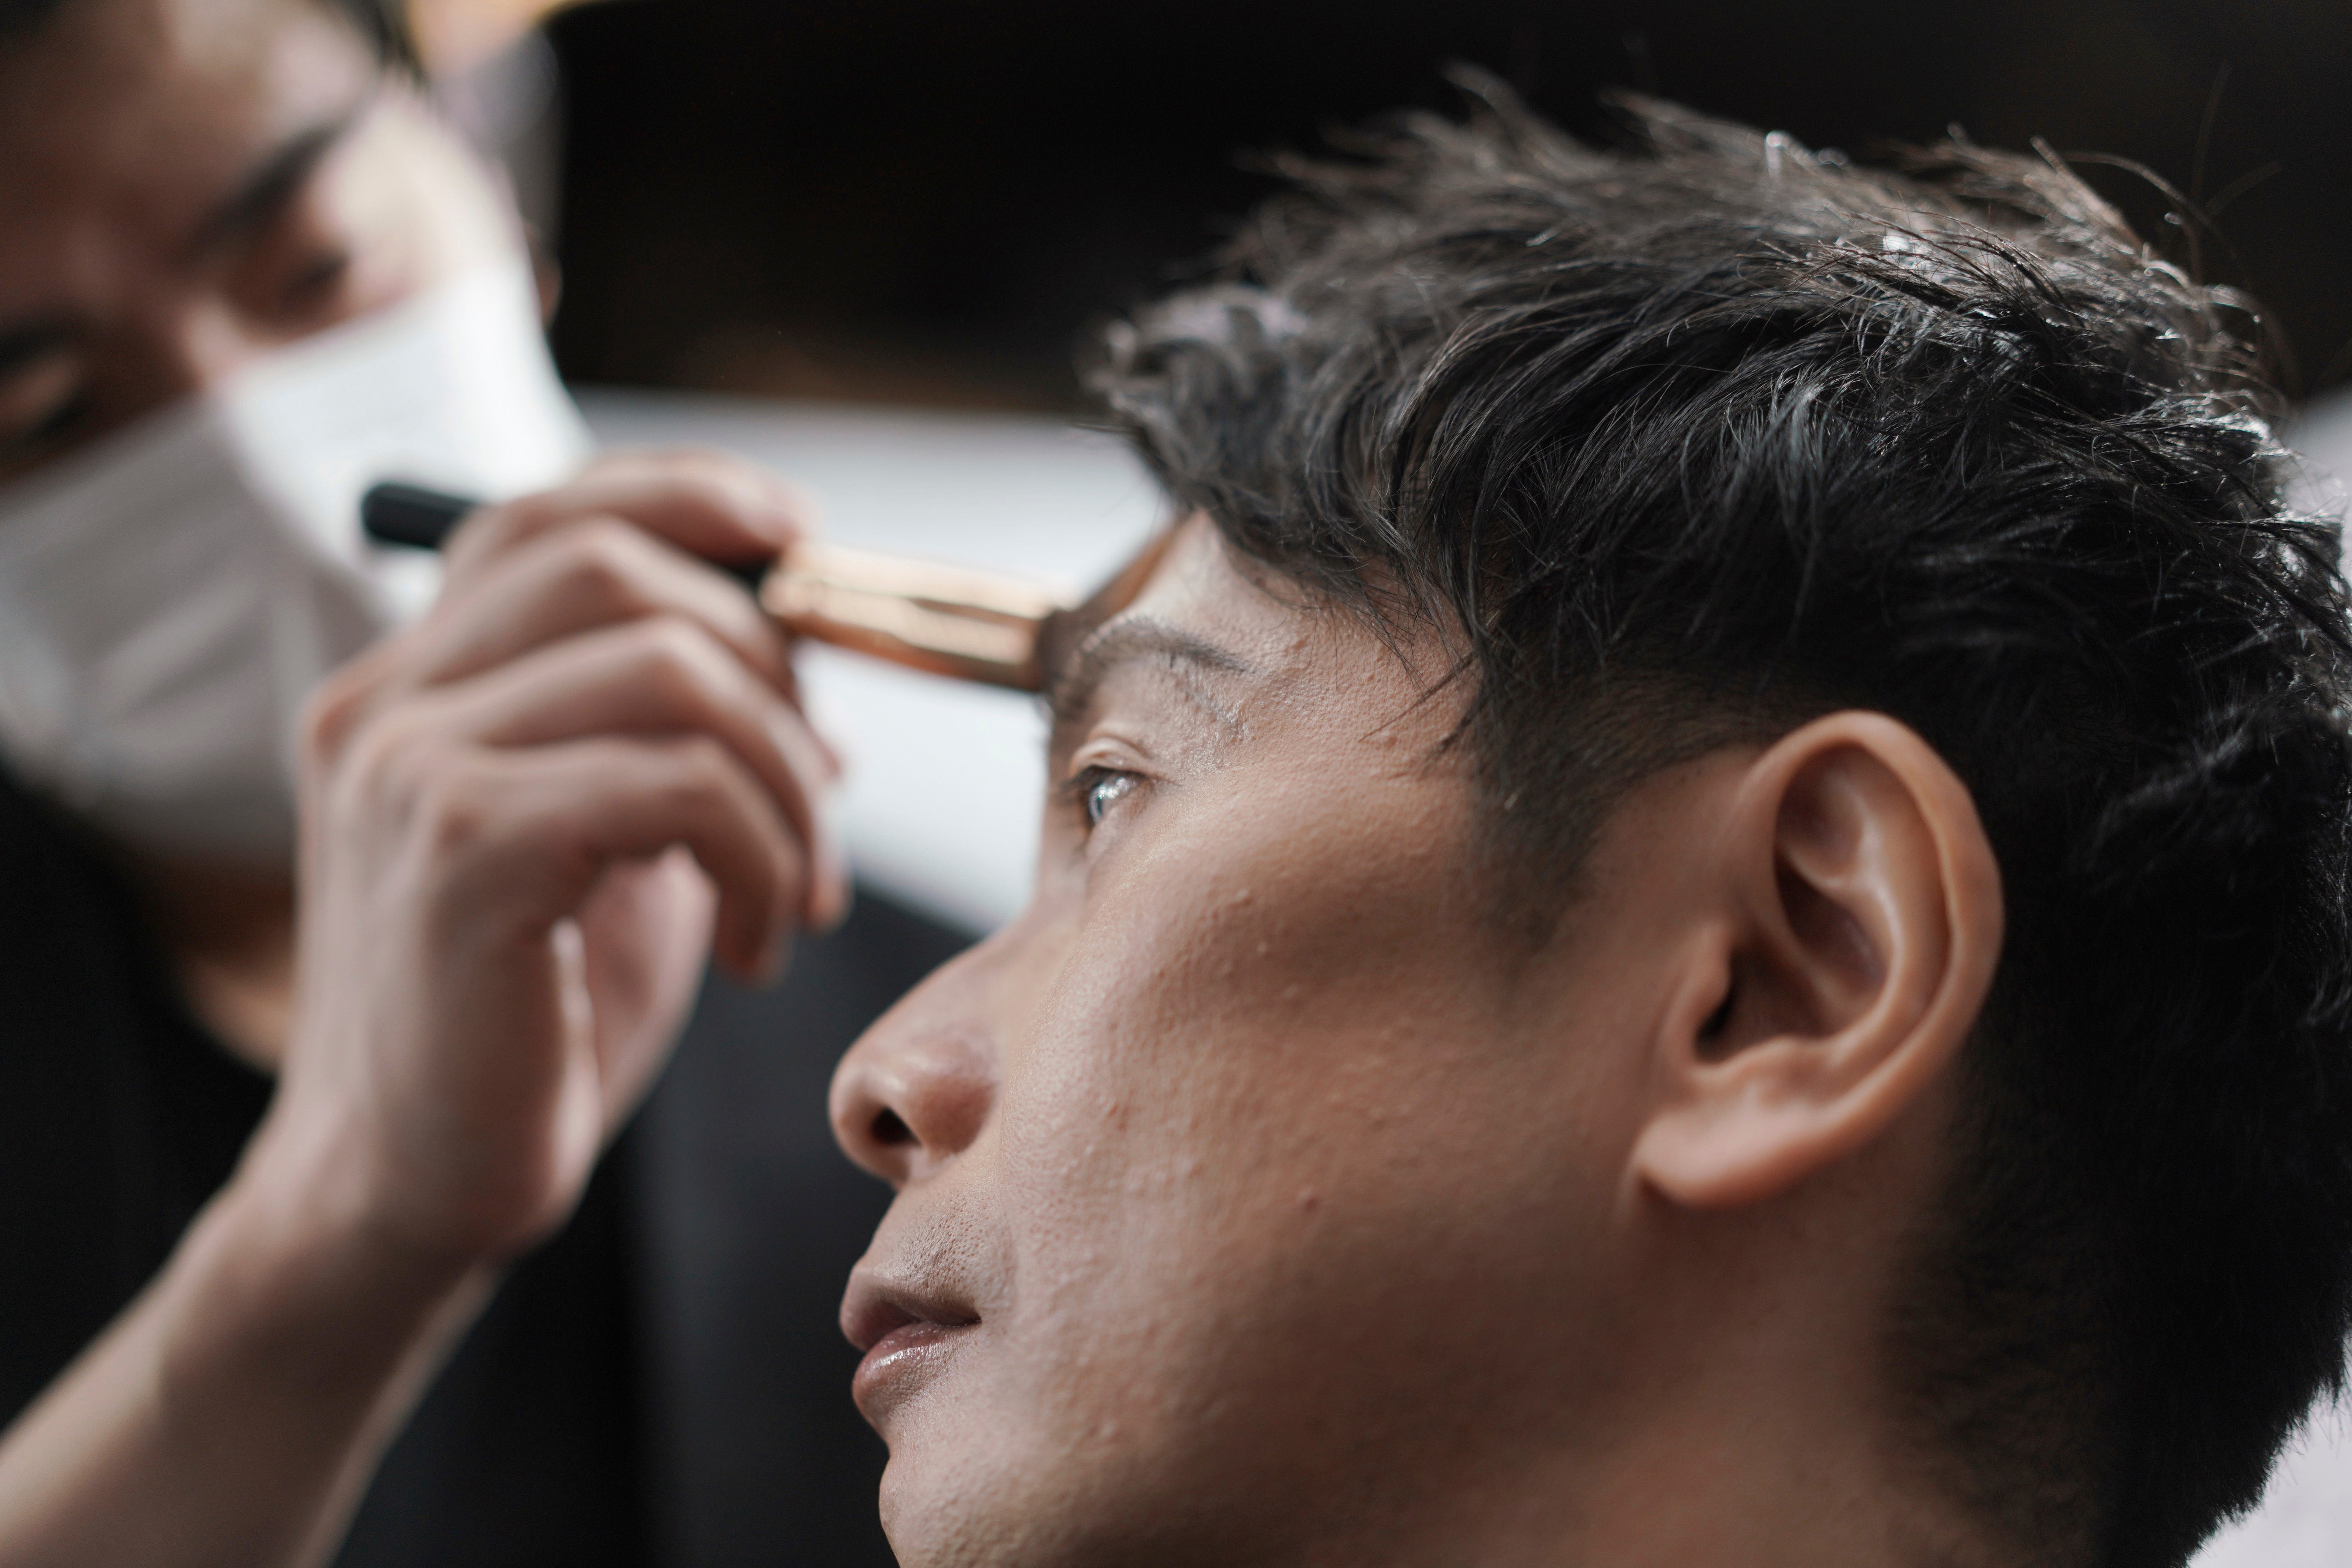 A man gets his make-up done at a salon in Tokyo. Businessmen have been visiting them in increasing numbers during the pandemic